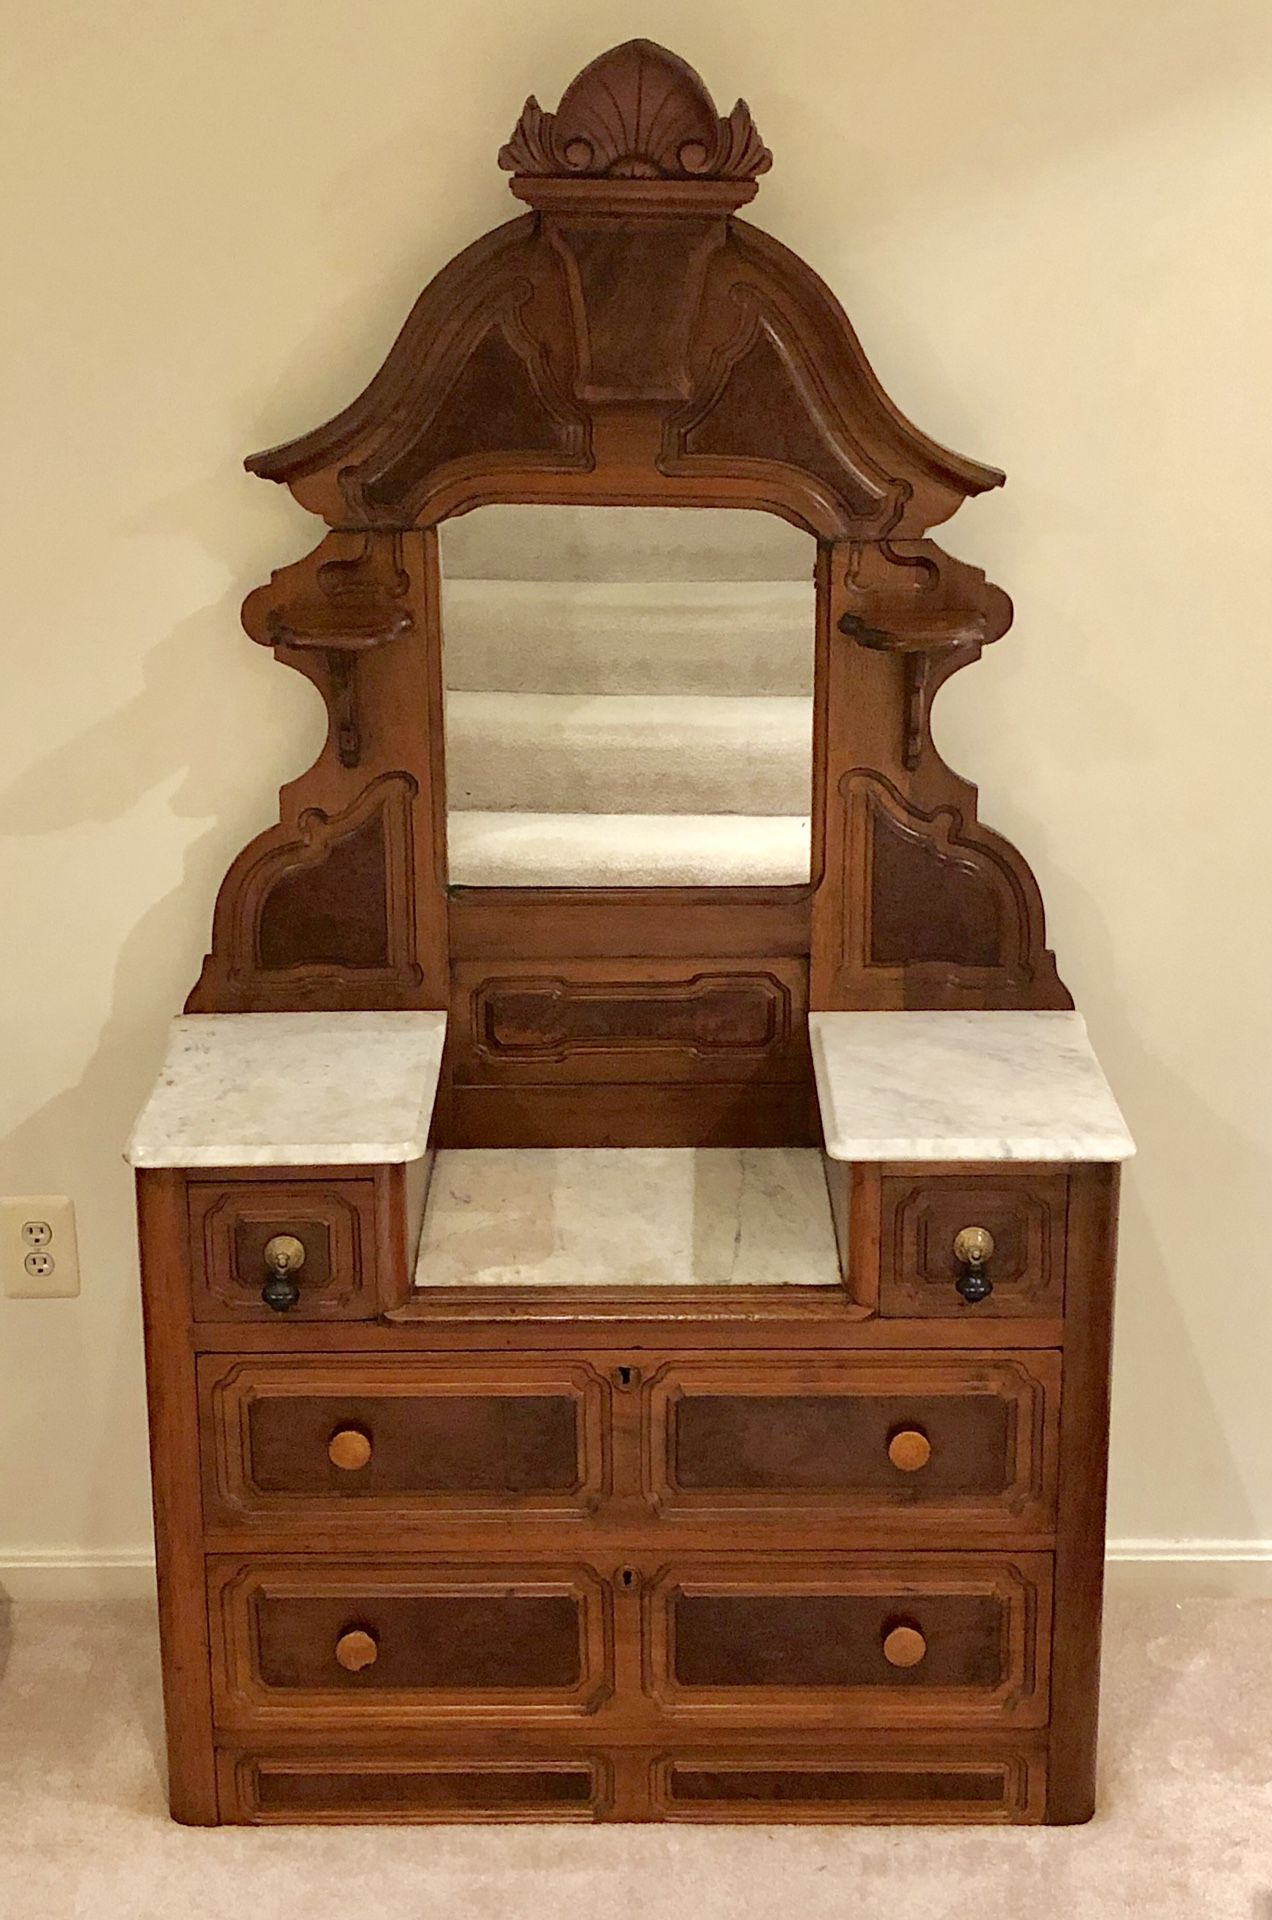 BEAUTIFUL ANTIQUE VICTORIAN MARBLE TOP DRESSER WITH MIRROR